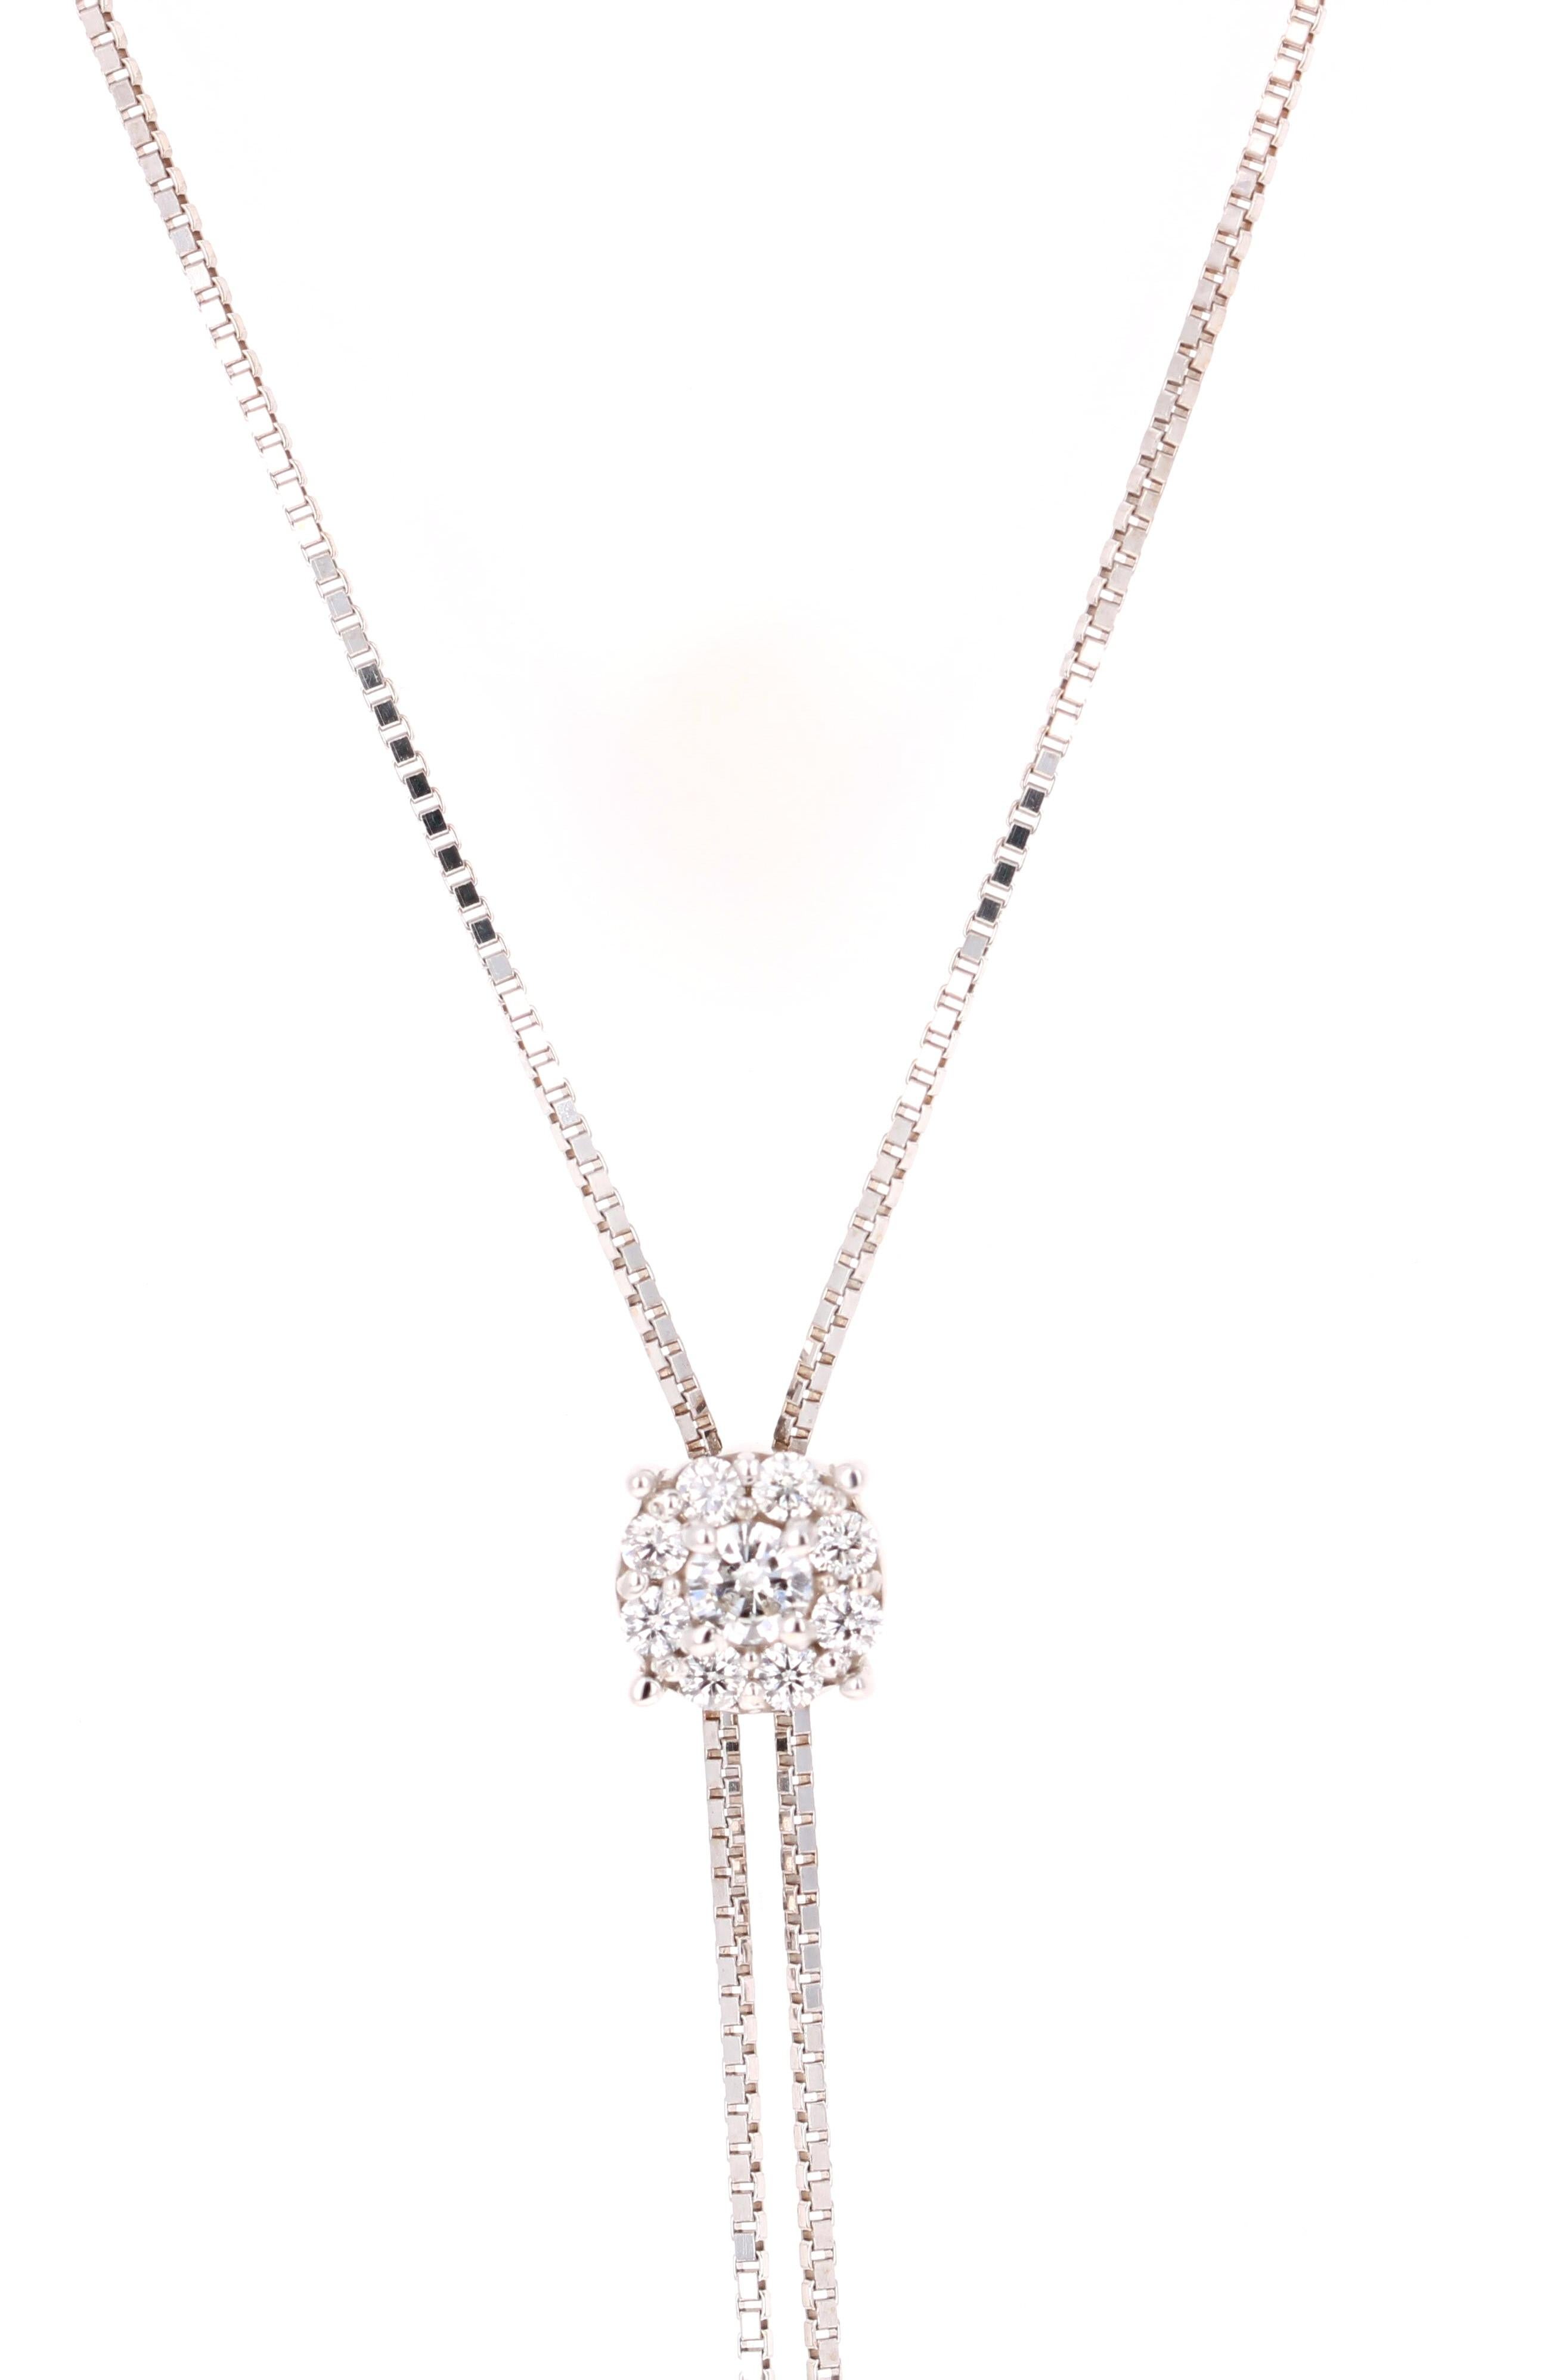 Beautiful, Elegant and On-trend Lariat style necklace!!  It has 9 Round Cut Diamonds (Clarity: SI, Color: F) that weigh 0.37 Carats. 

It is beautifully curated in 14 Karat White Gold and weighs 5.6 grams and is approximately 20 inches long.   The